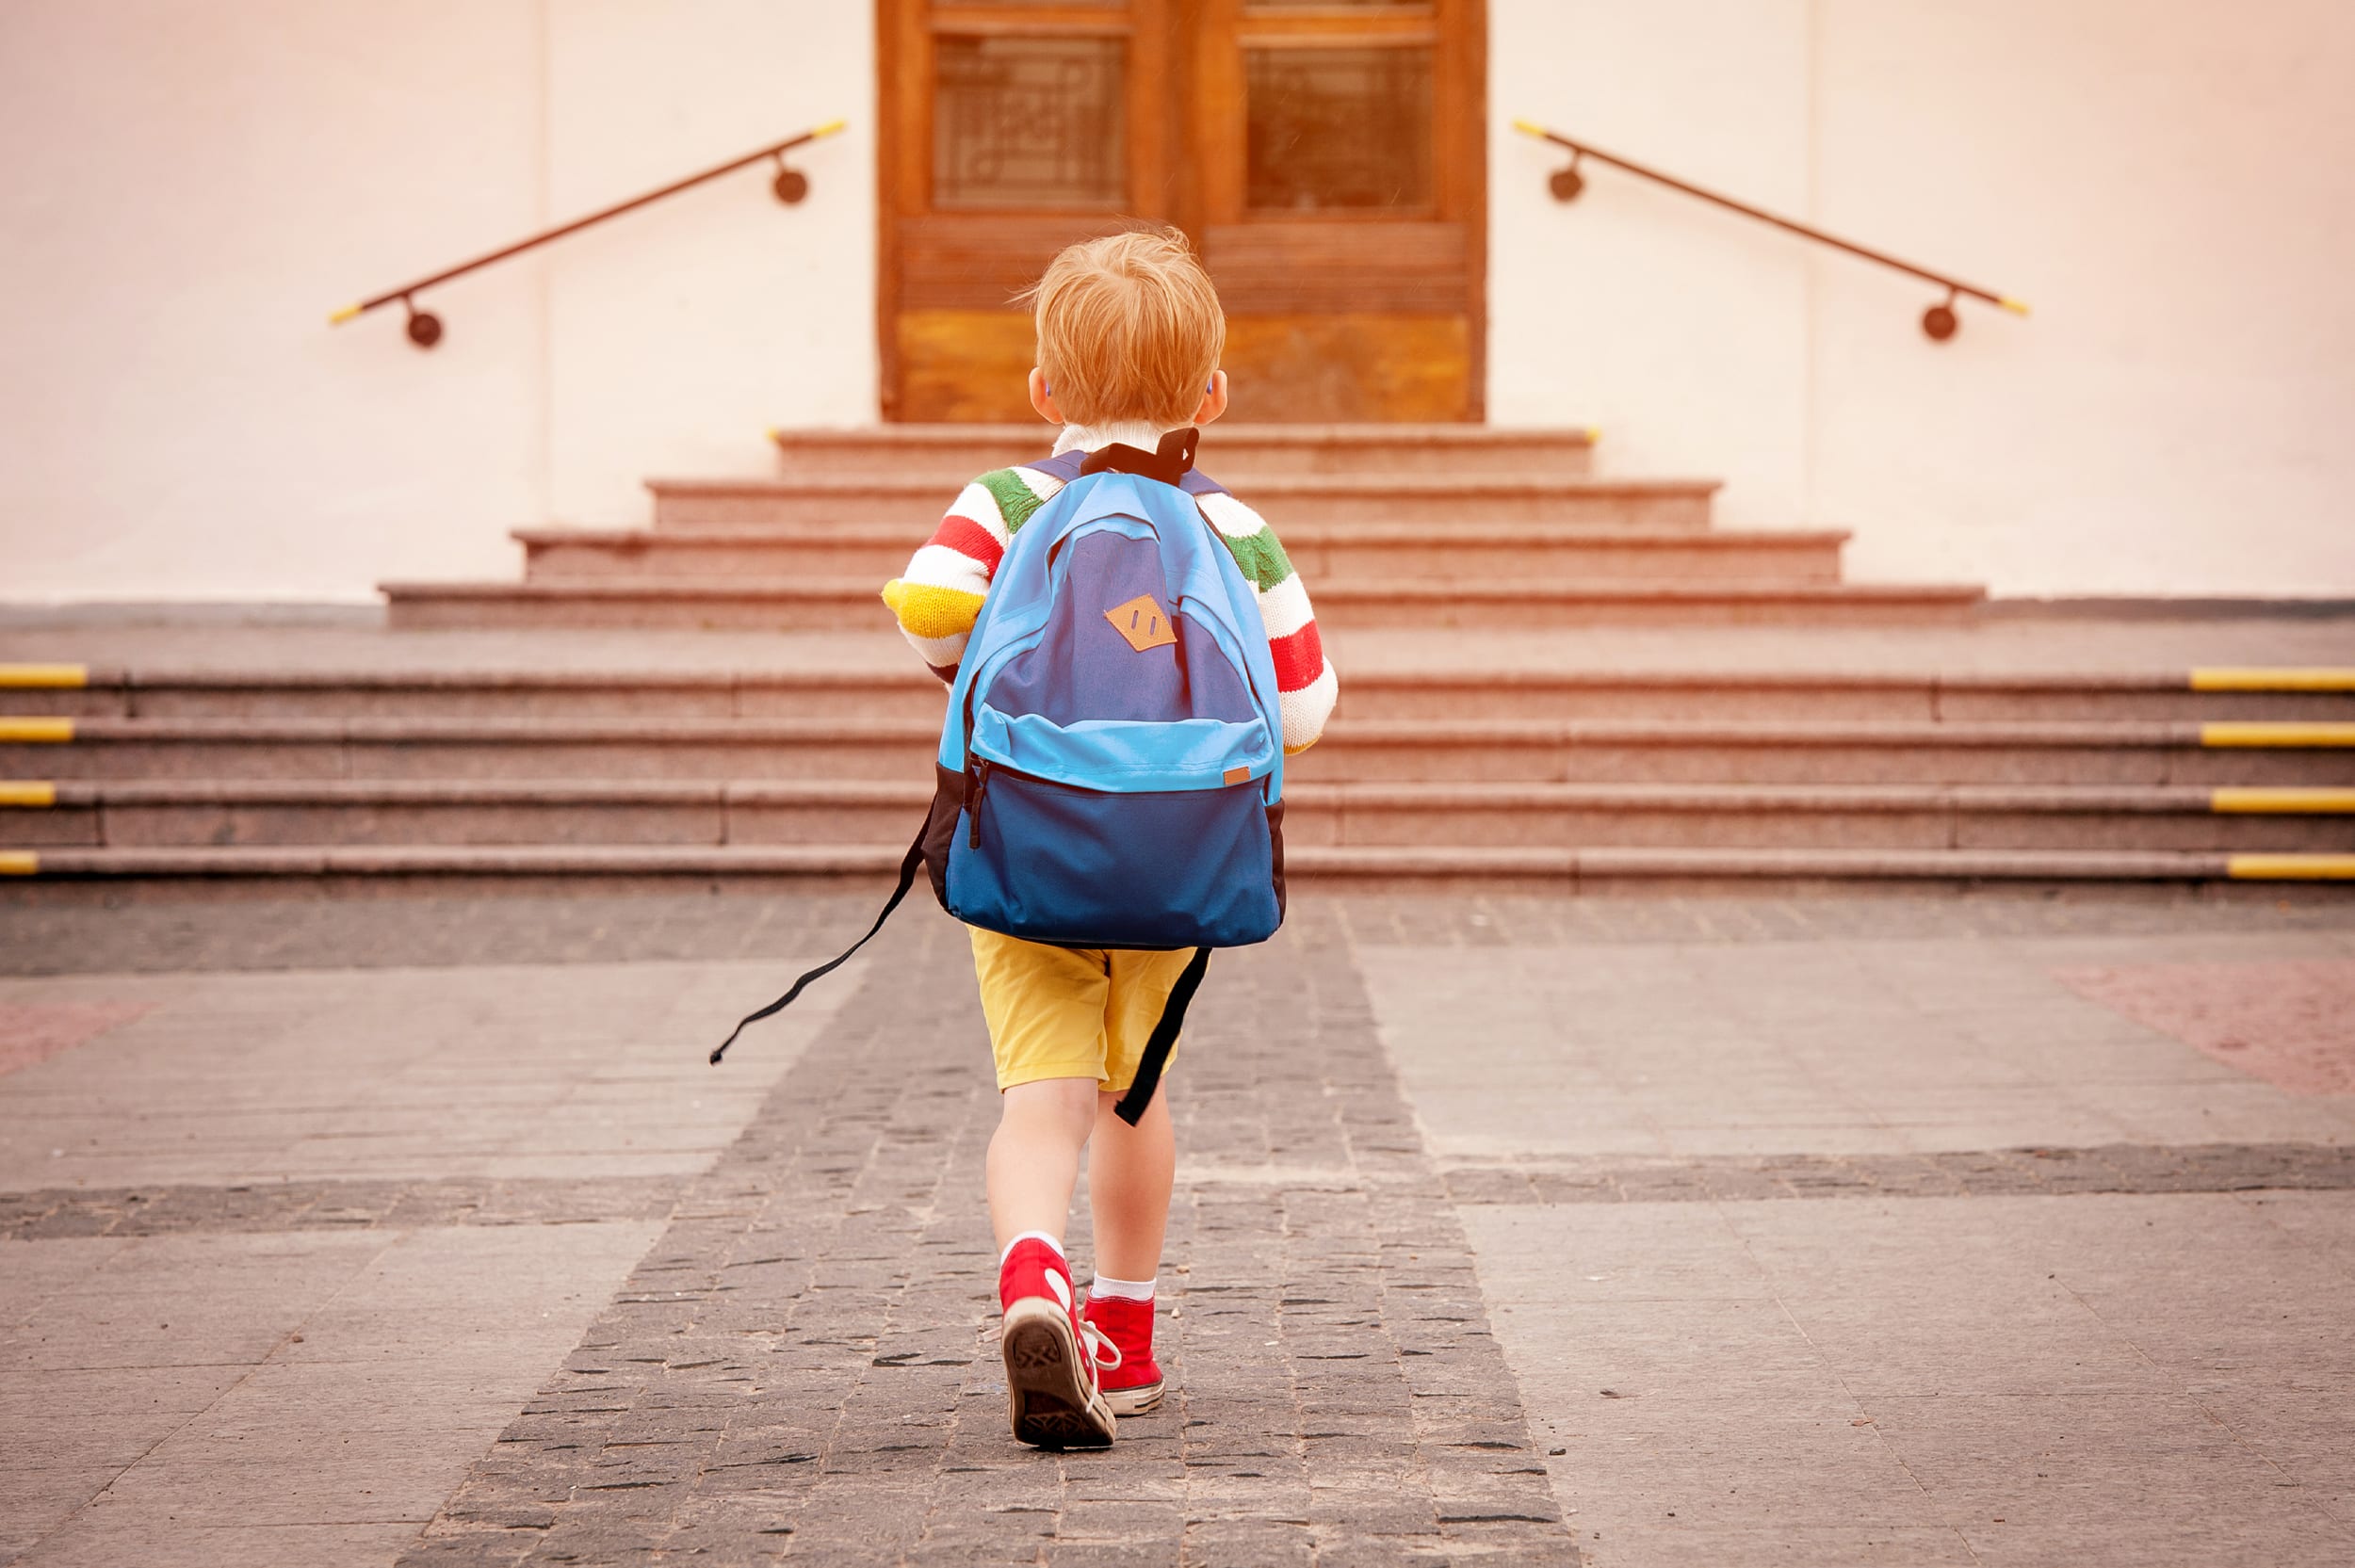 ama post featured img a toddlers first steps into school starts at home montessori principles transition strategies for parents - american montessori academy montessori school in chicago il